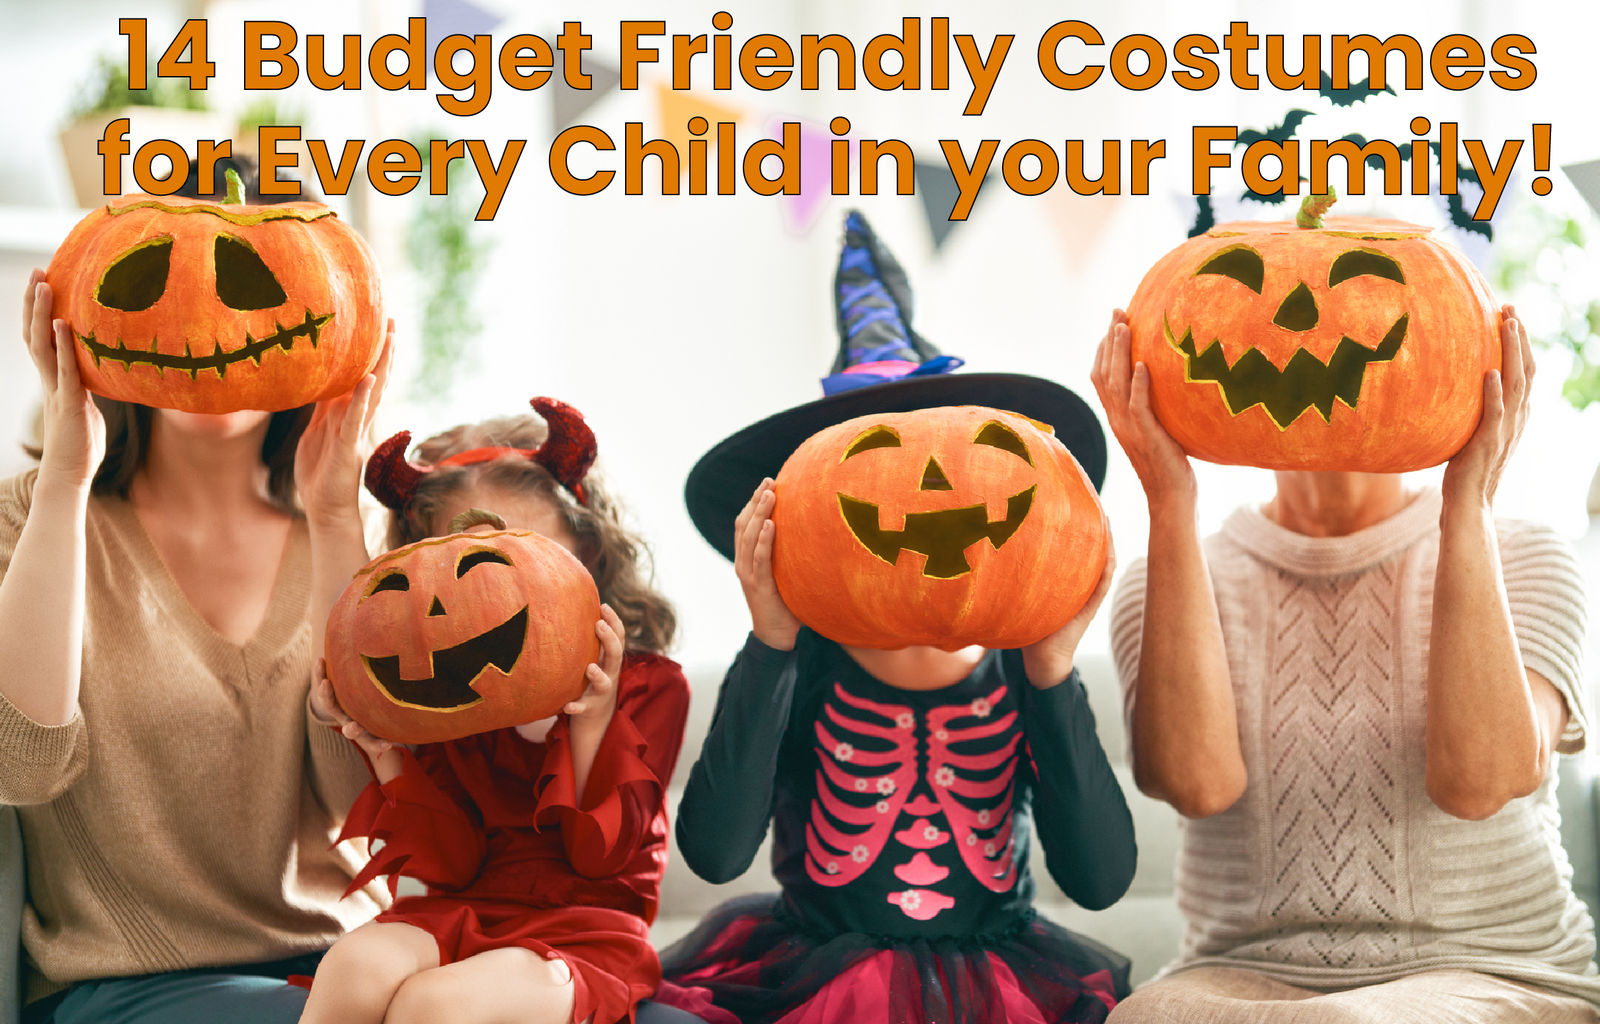 14 Budget-Friendly Halloween Costumes for Every Child in Your Family